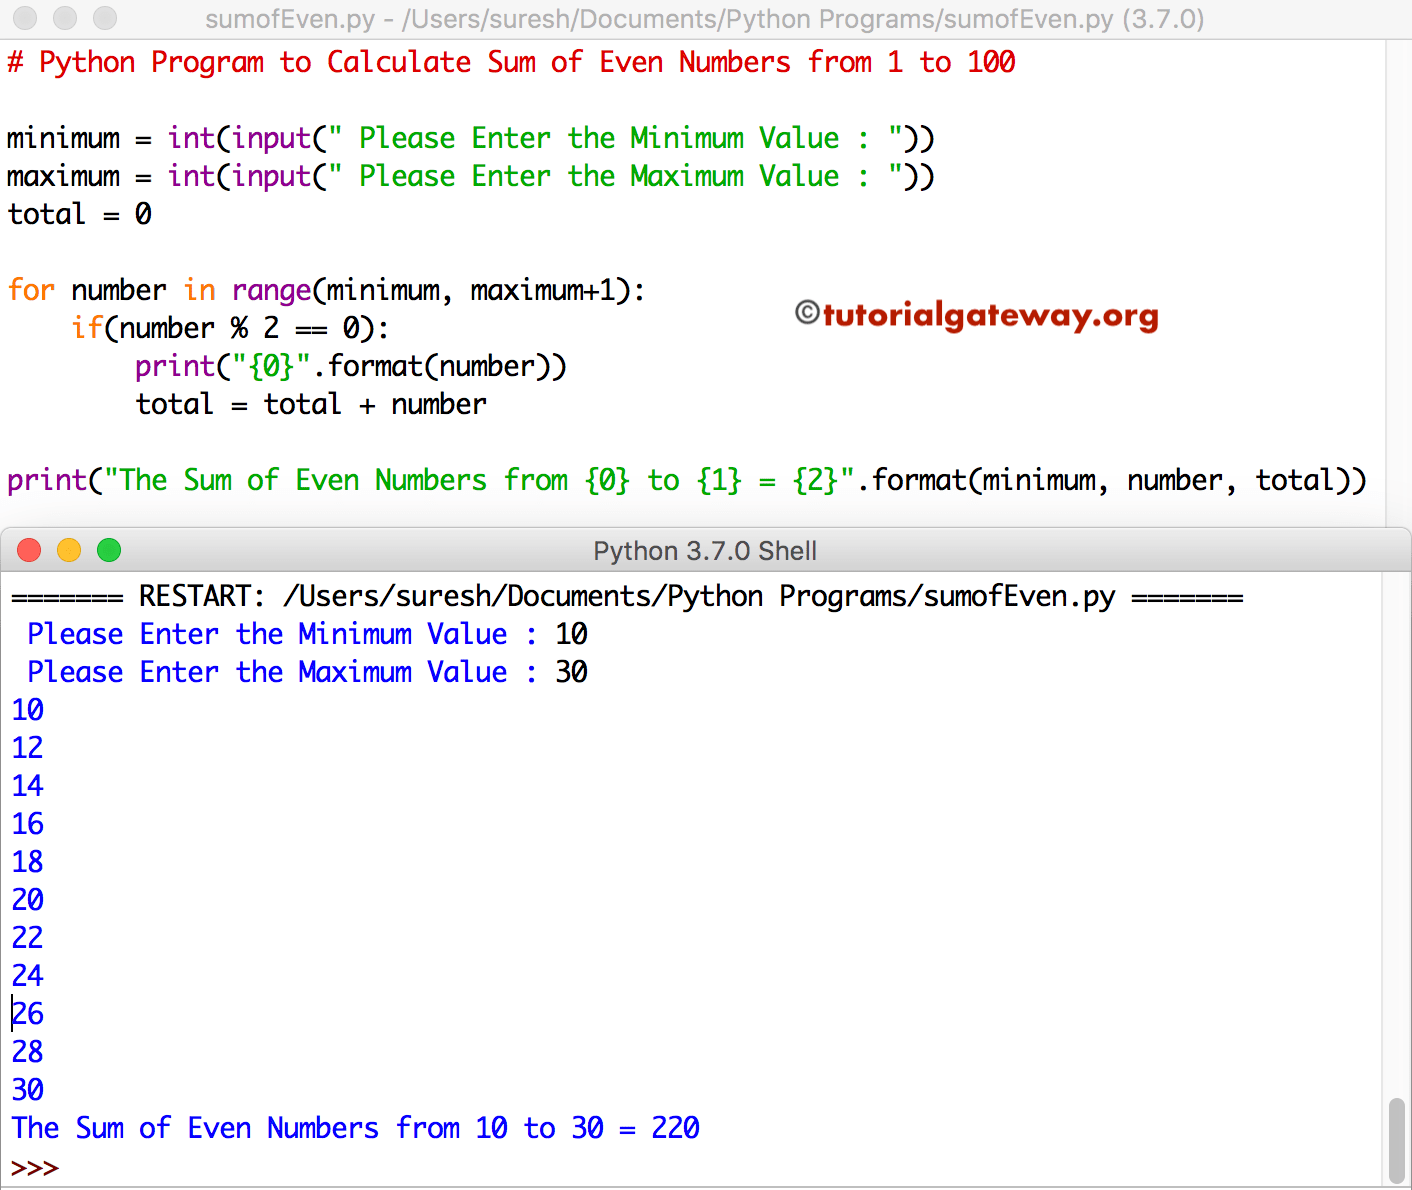 Python Program to Calculate Sum of Even Numbers